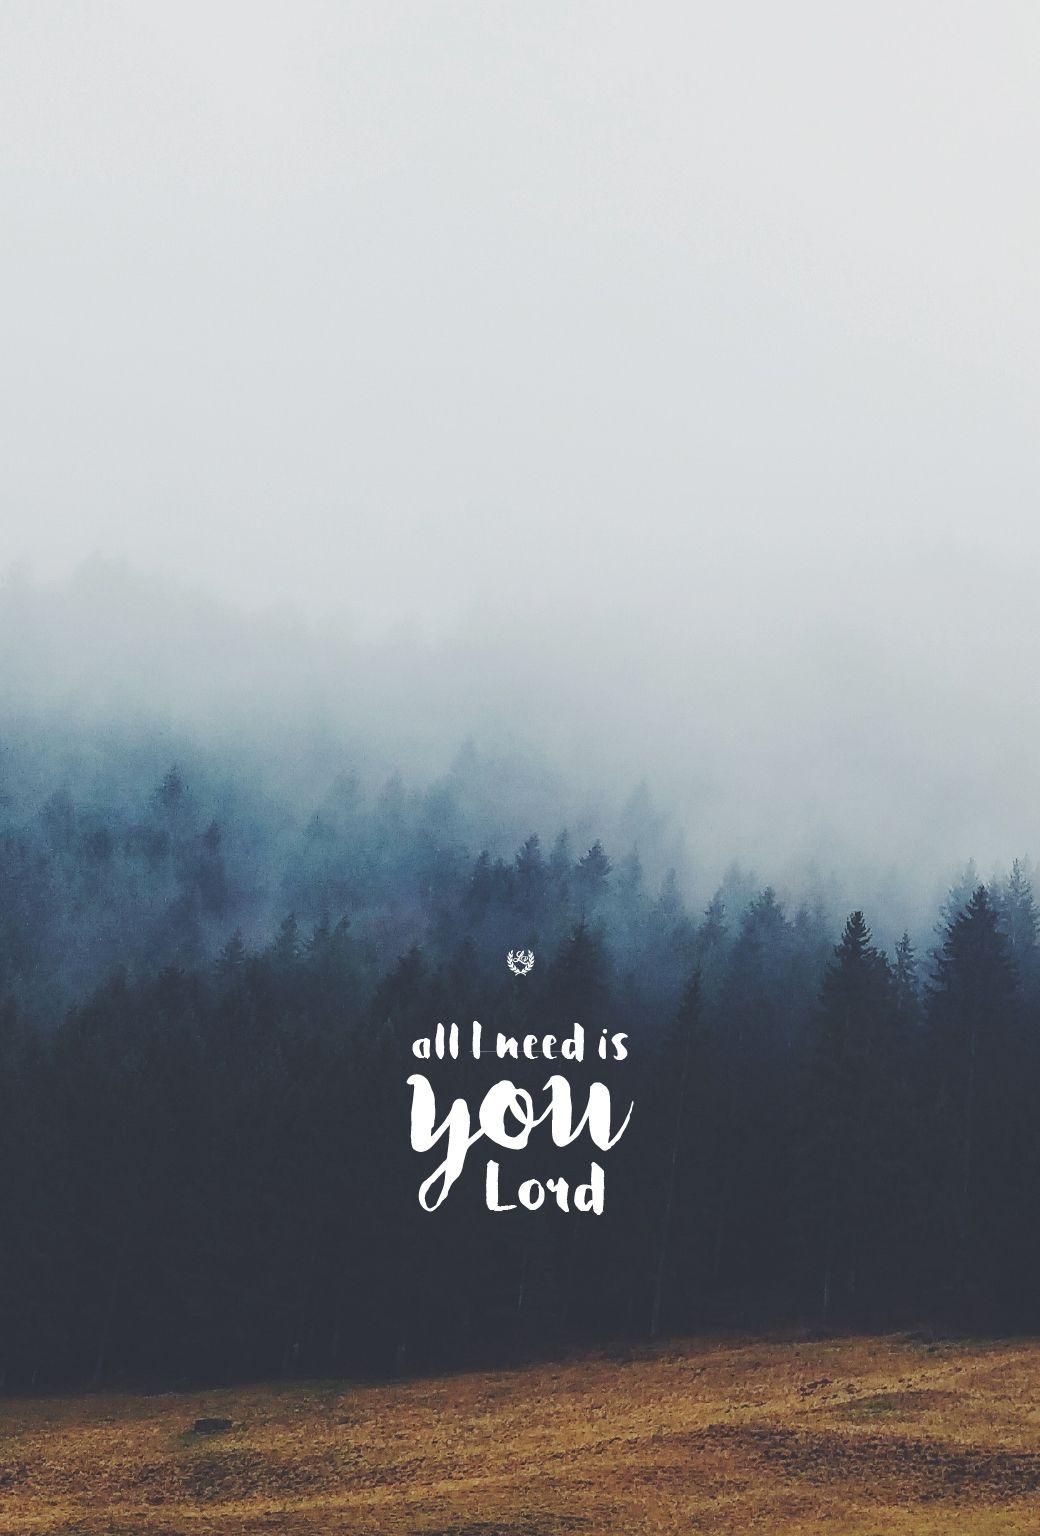 All I Need is You by Hillsong United // Phone screen format // Like